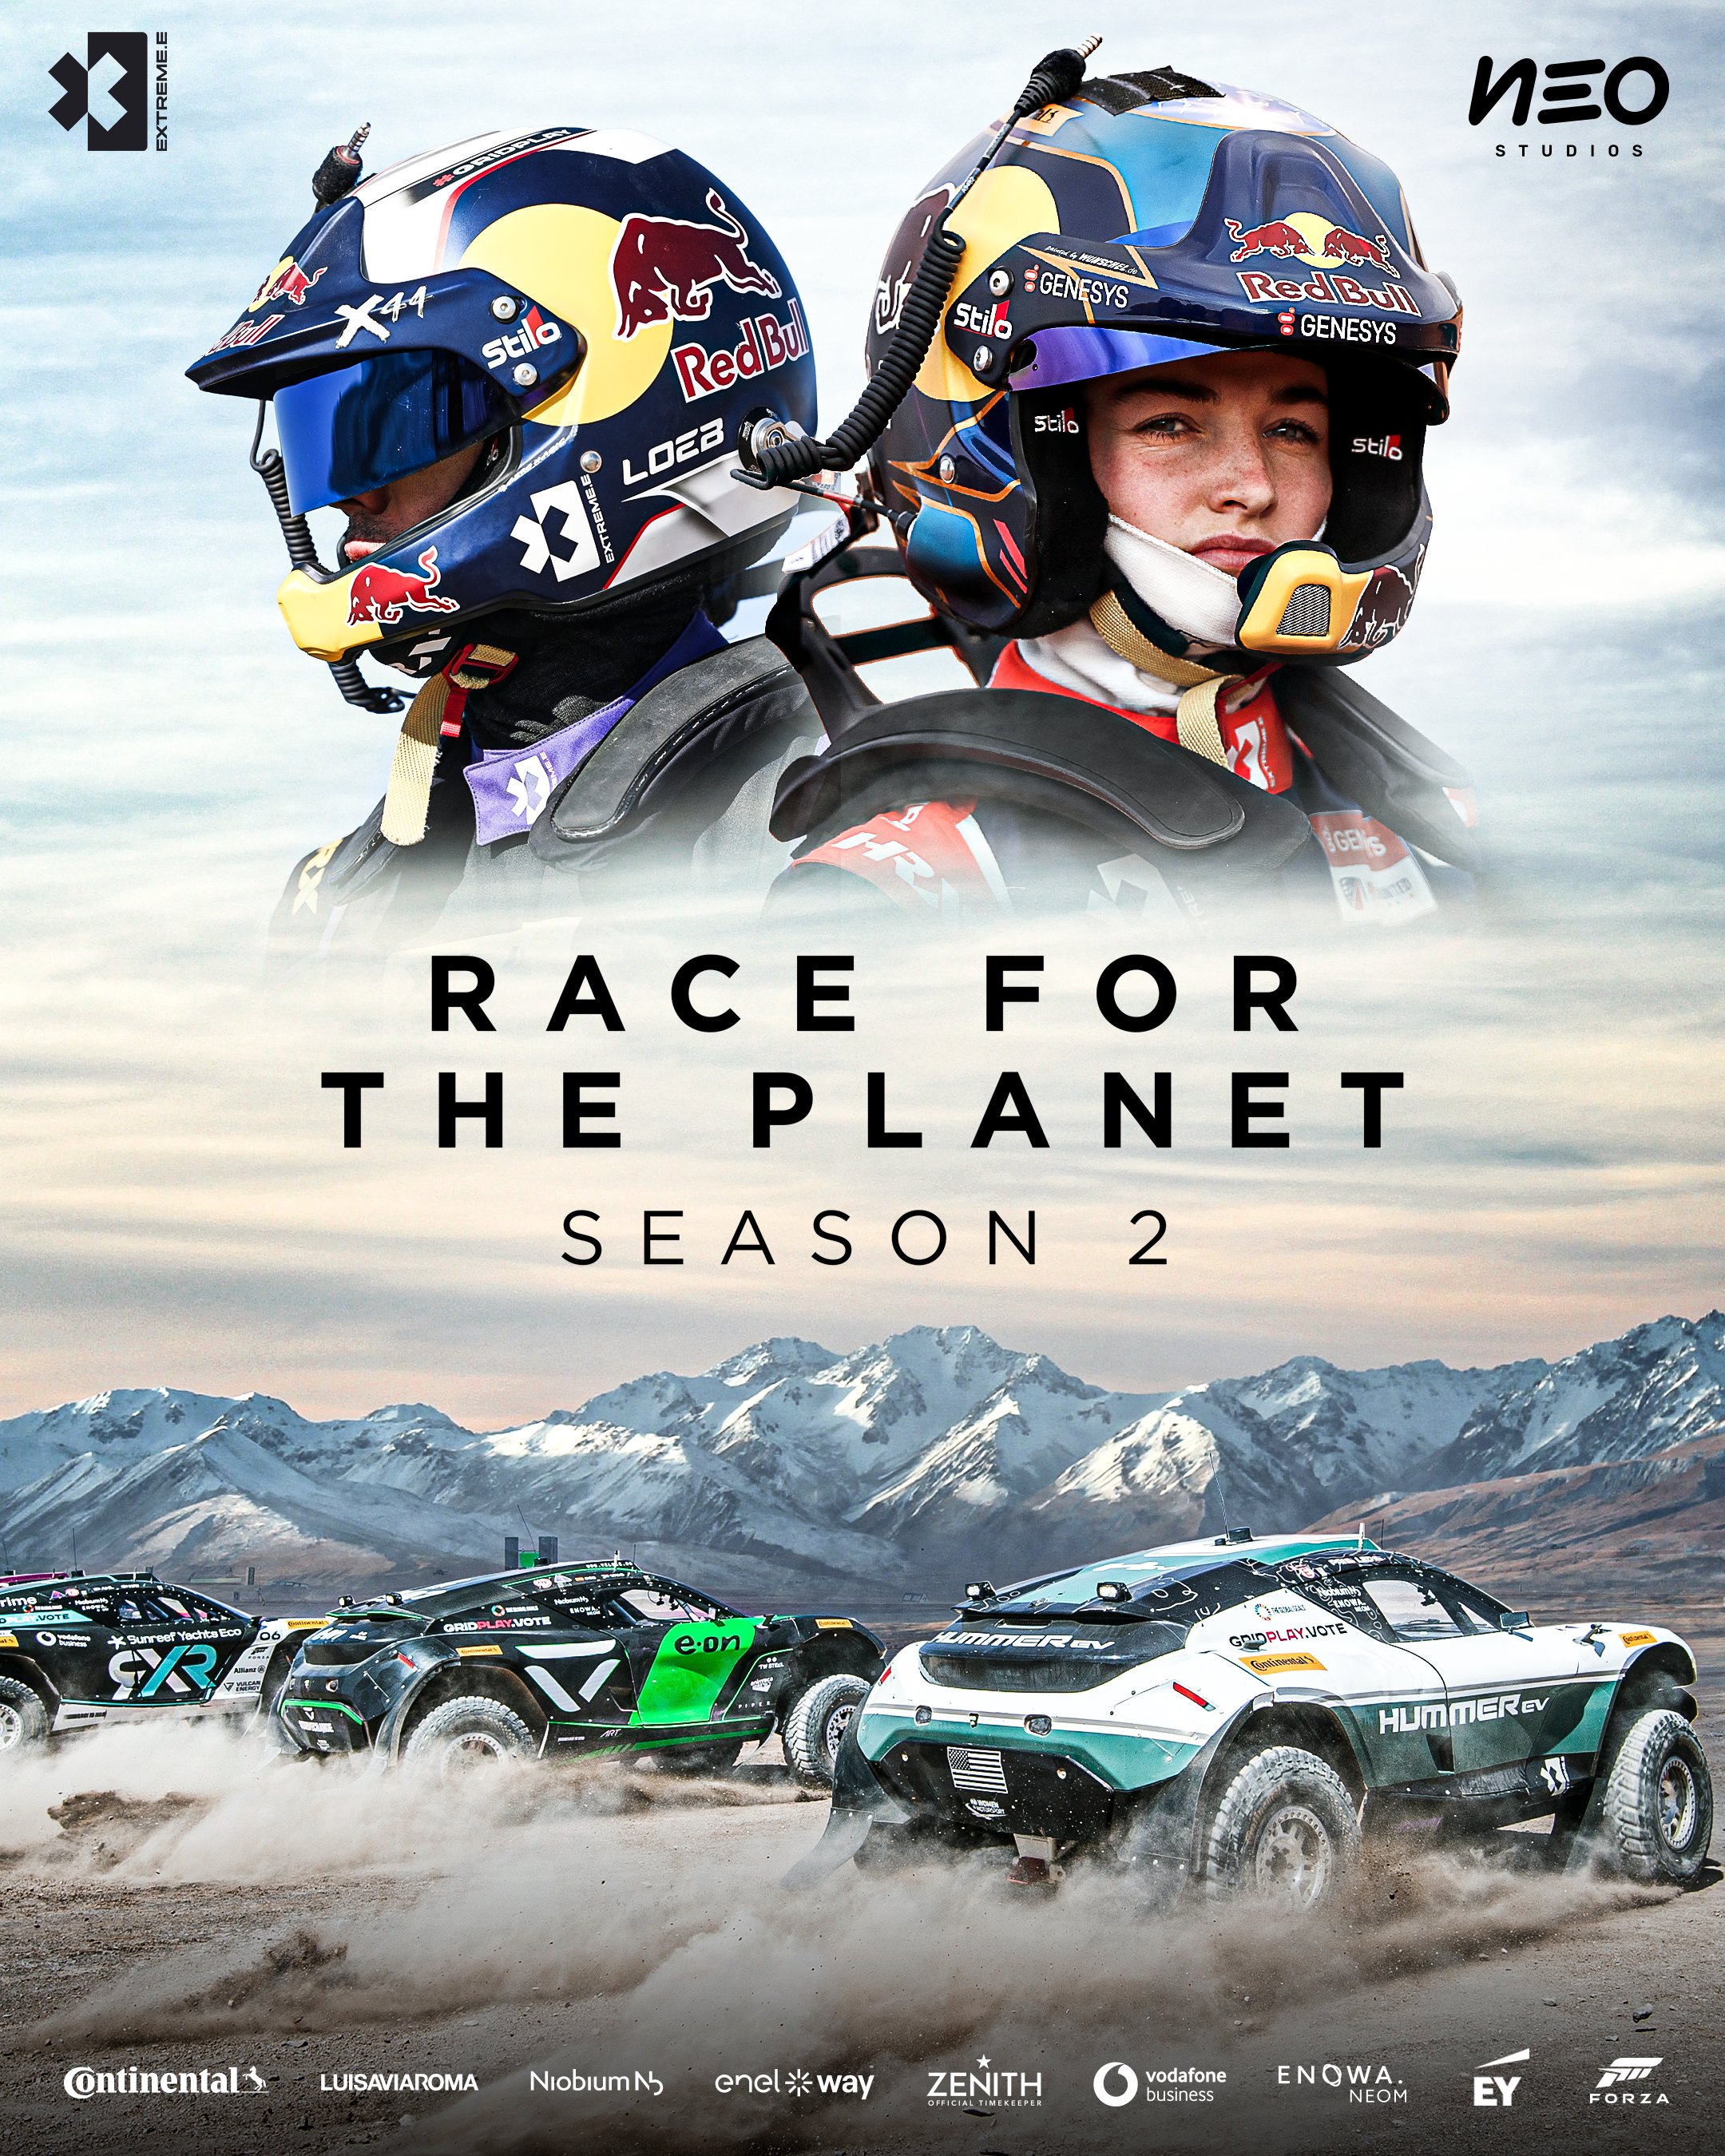 Race for the Planet